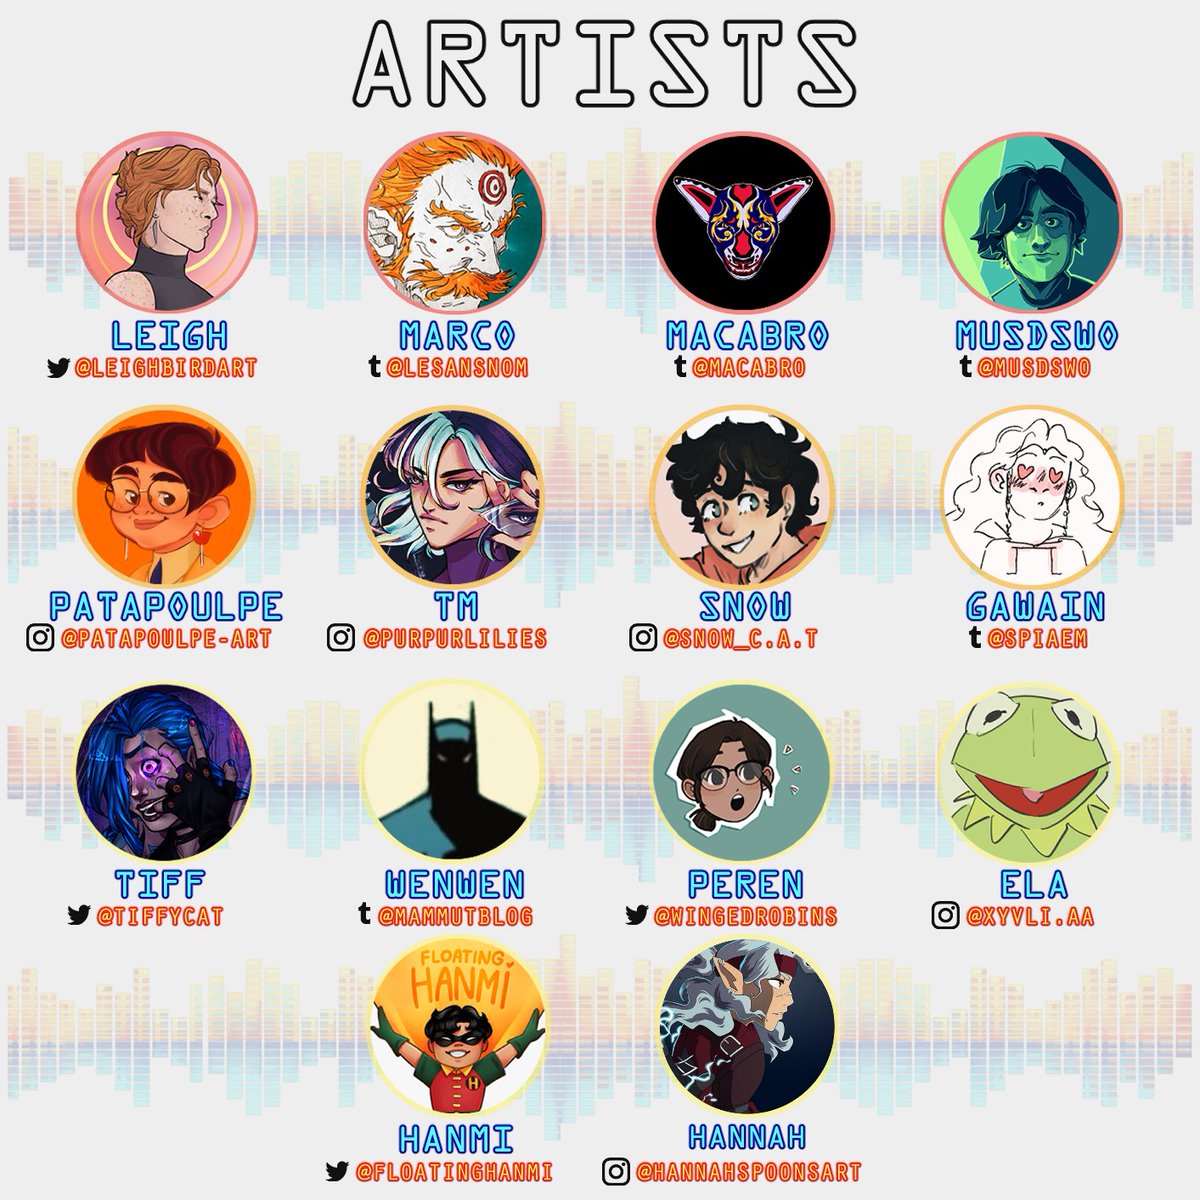 Say hello to our full list of amazing contributors✨
They’re working hard to bring you all the very flippin’ best Tim content! (pun highly intended)

Keep up with all the work, progress and everything in-between on our Mailing List (link in thread)

Artists: